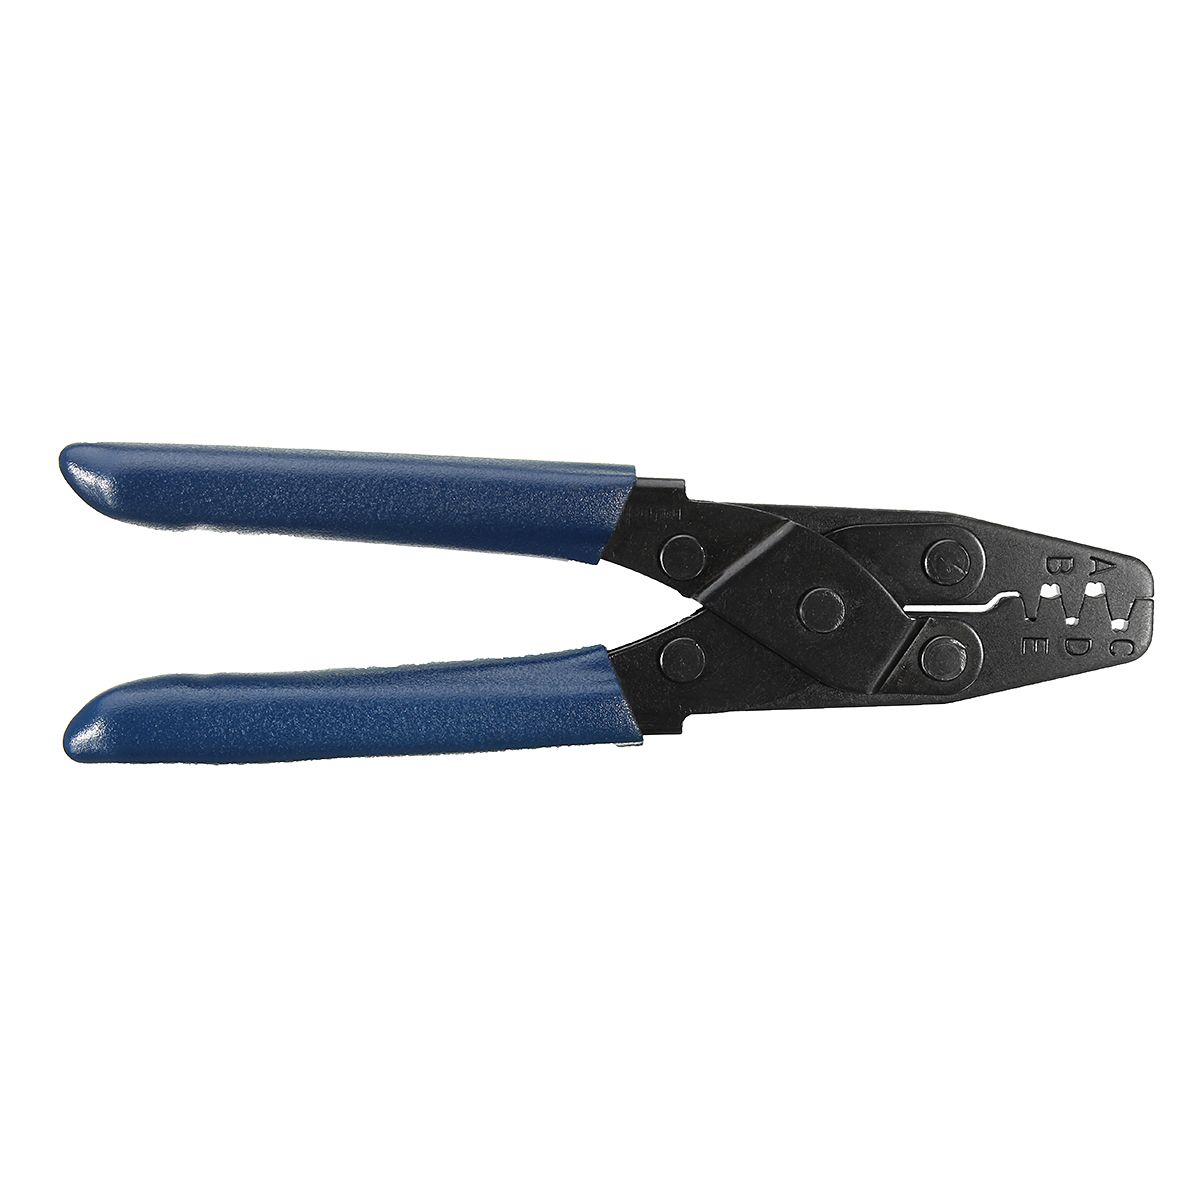 210mm-AWG-10-22-Terminal-Crimp-Electrical-Crimping-Tool-Wire-Stripper-Plier-1143788